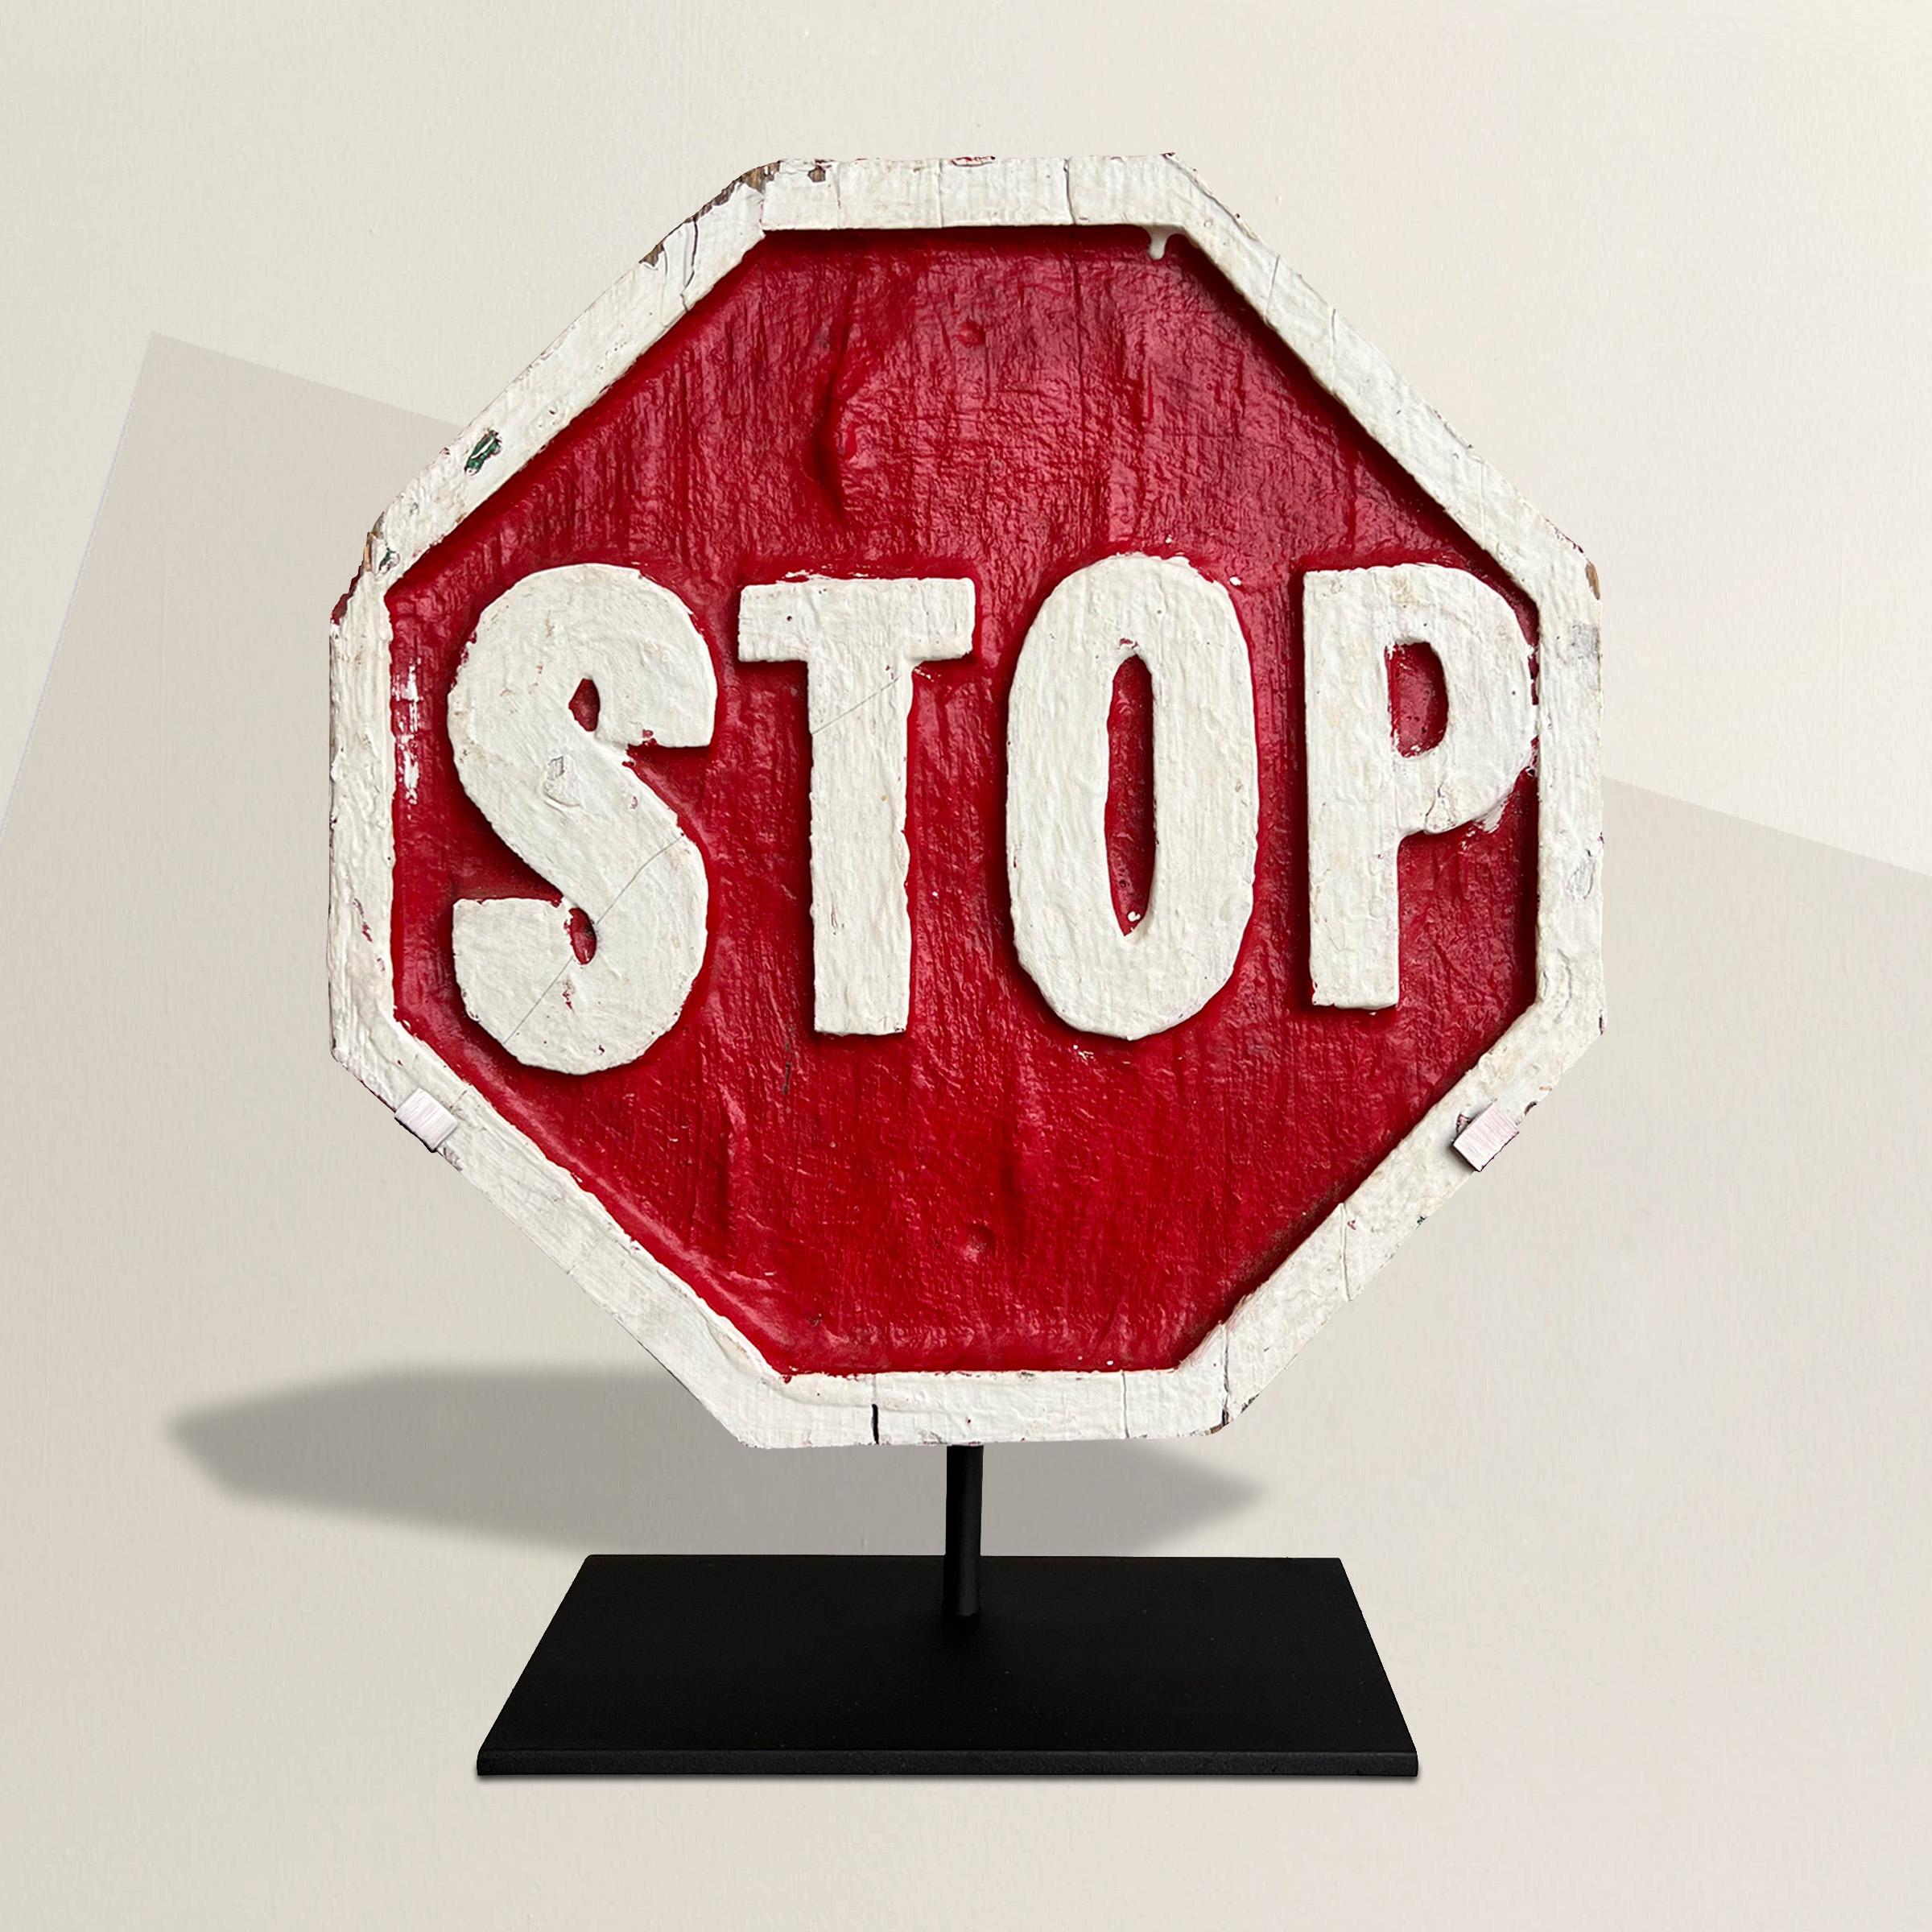 A 20th century American Folk Art hand-carved and painted wood stop sign mounted on a custom steel stand.